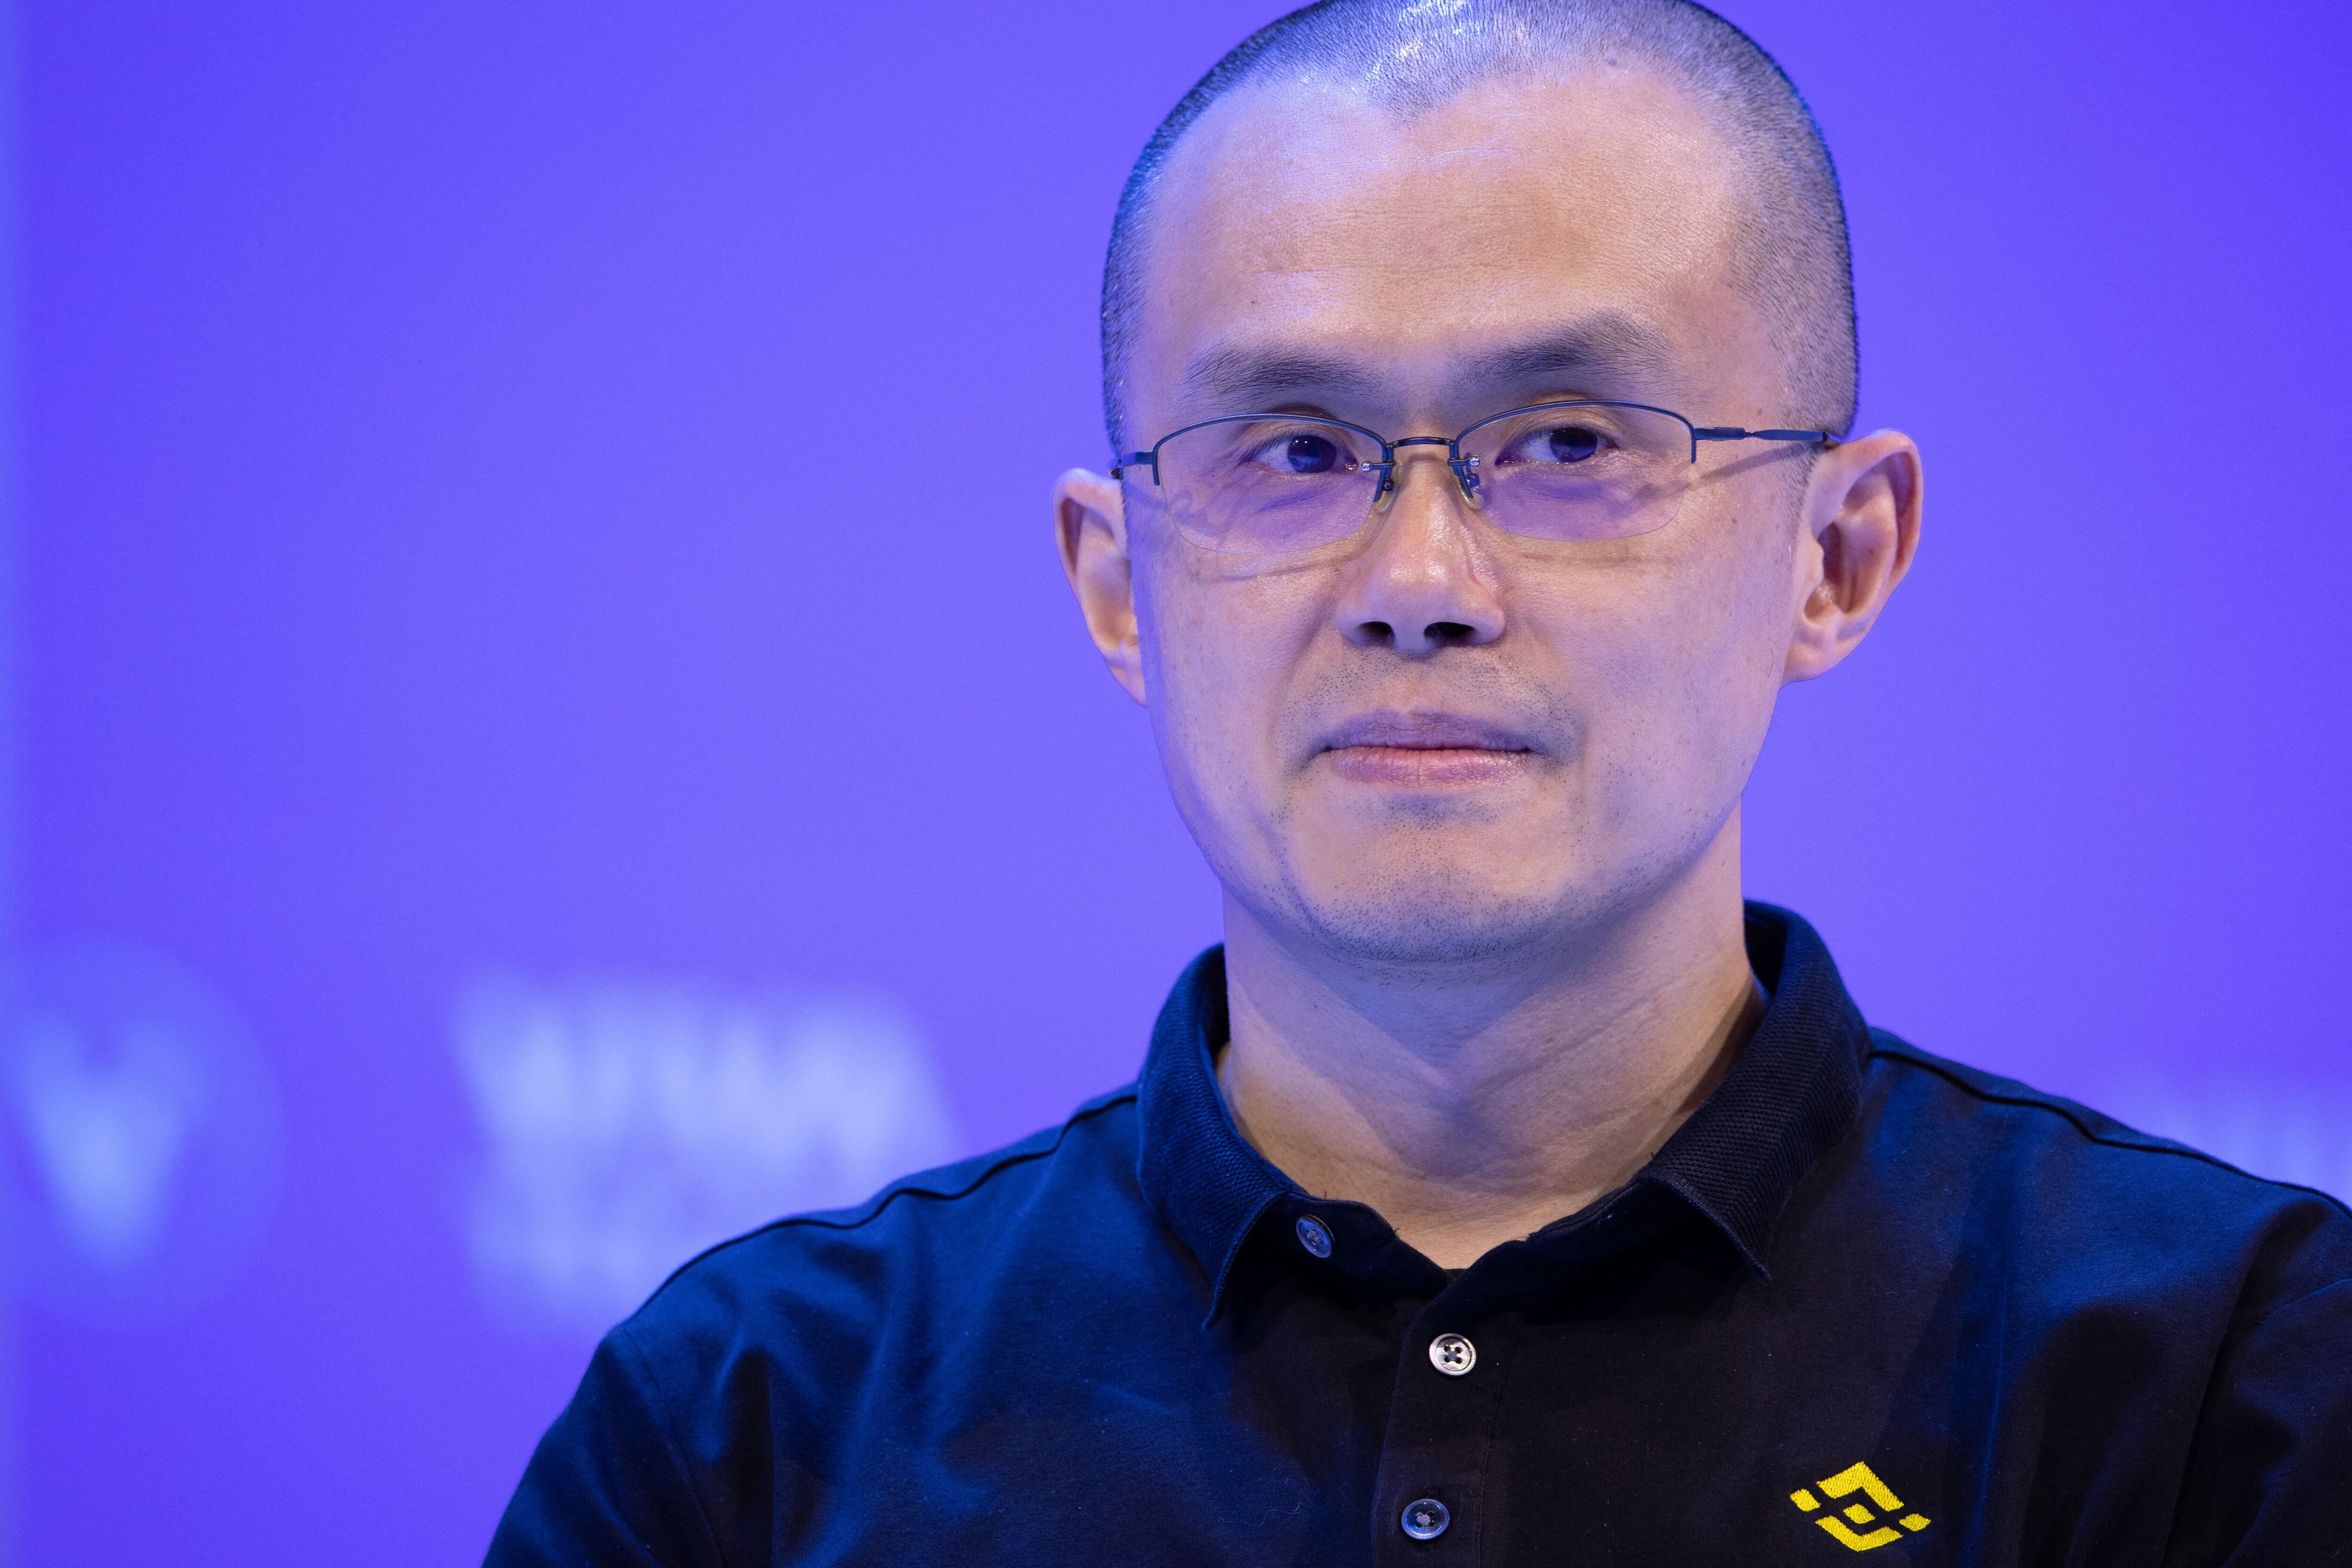 Binance founder Changpeng Zhao reportedly begins four-month prison sentence